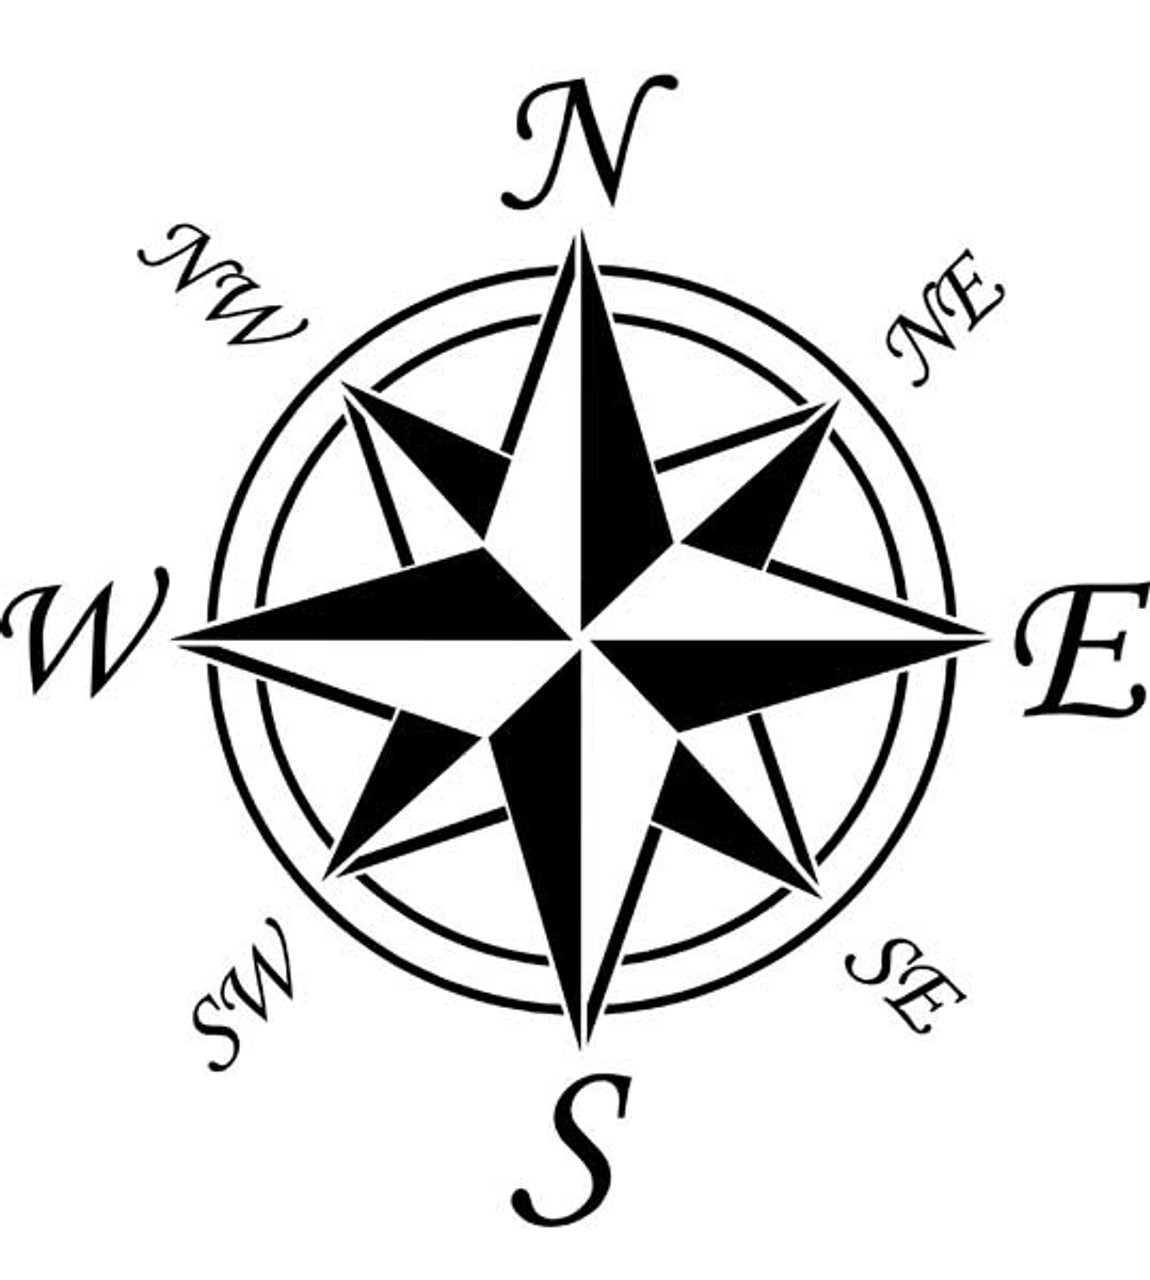 Compass Rose with Directionals